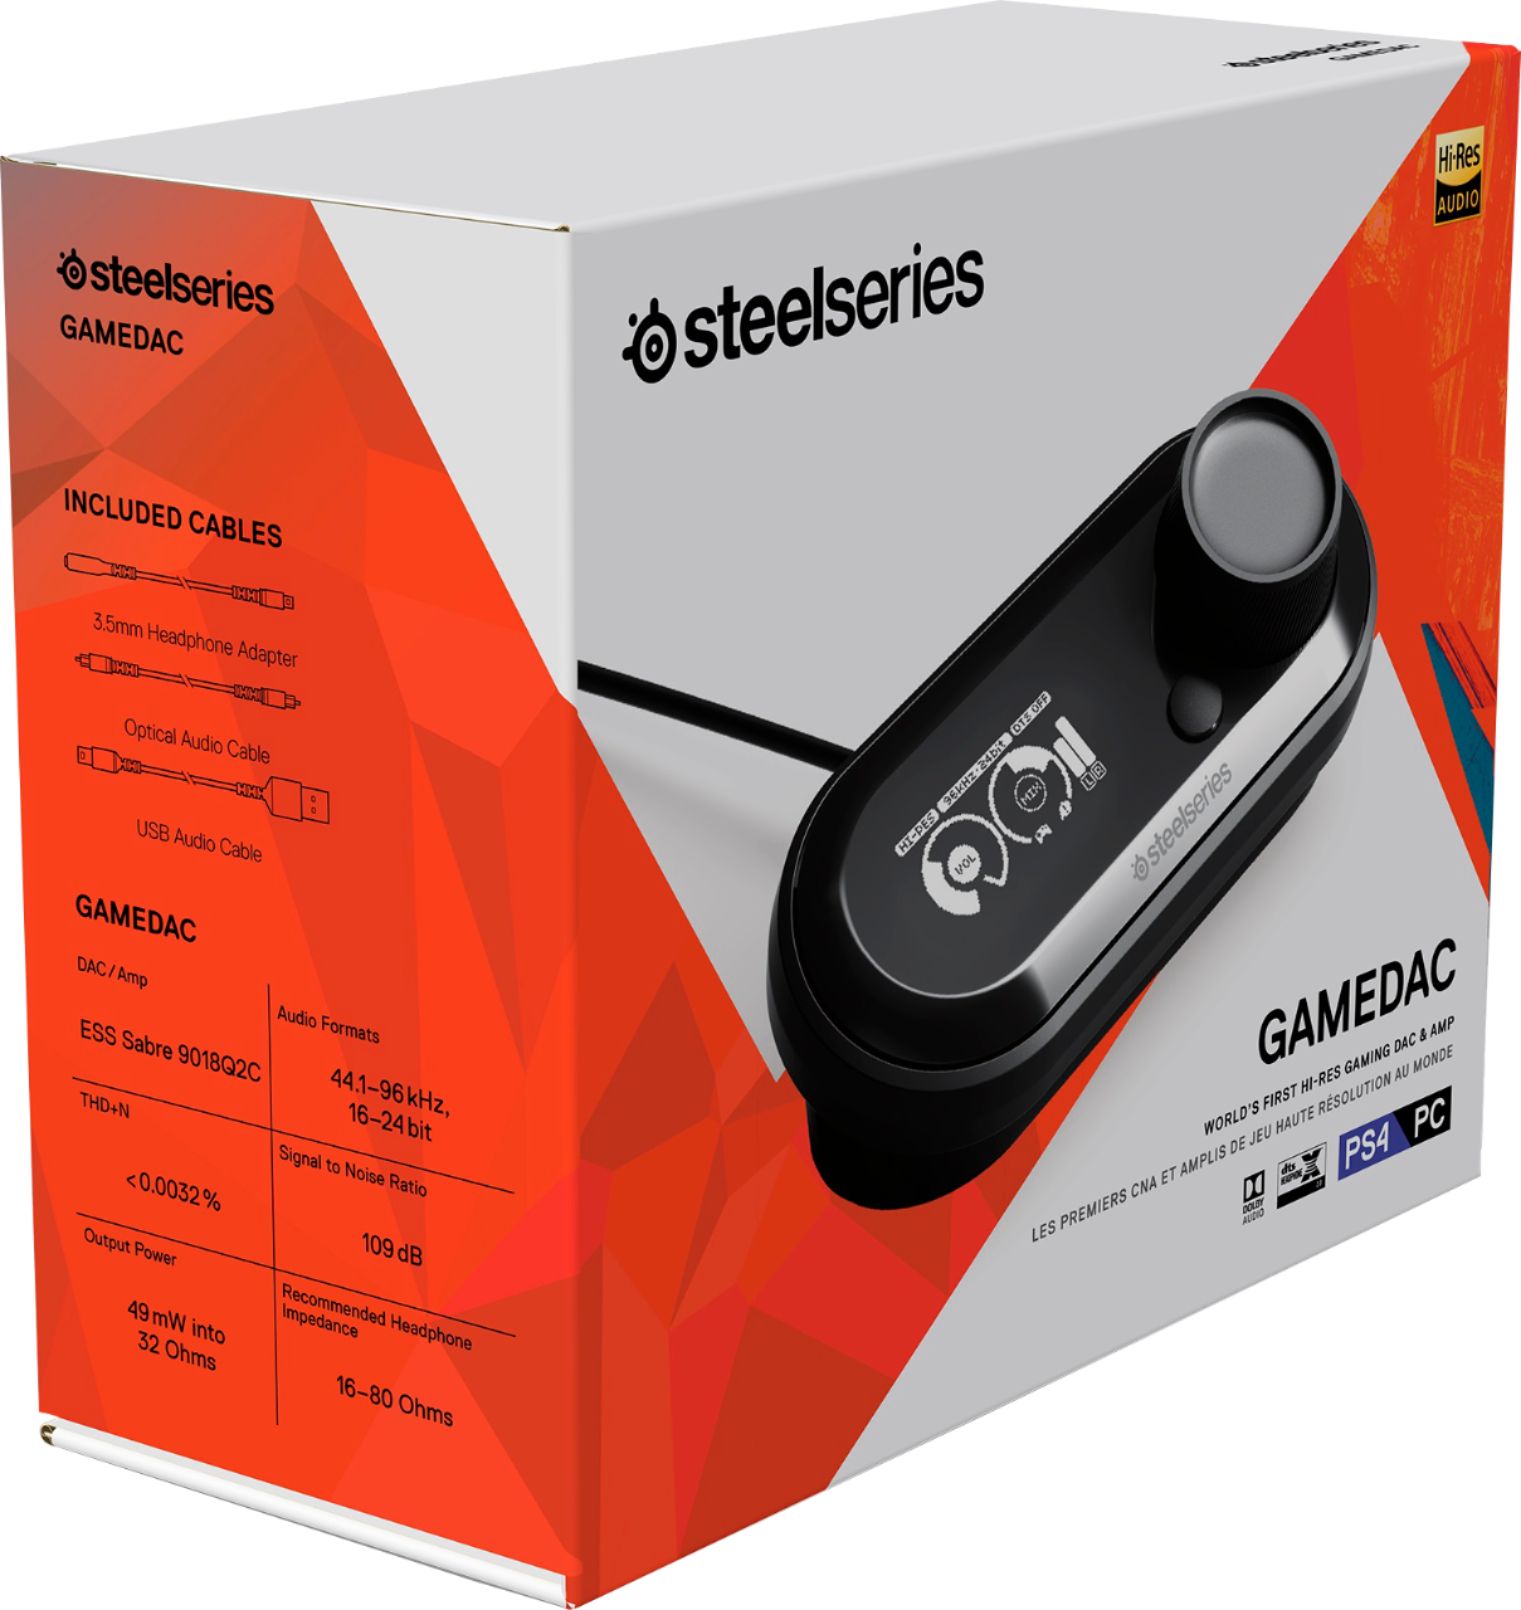 SteelSeries GameDAC Certified Hi-Res gaming DAC and amp for PS4 and PC